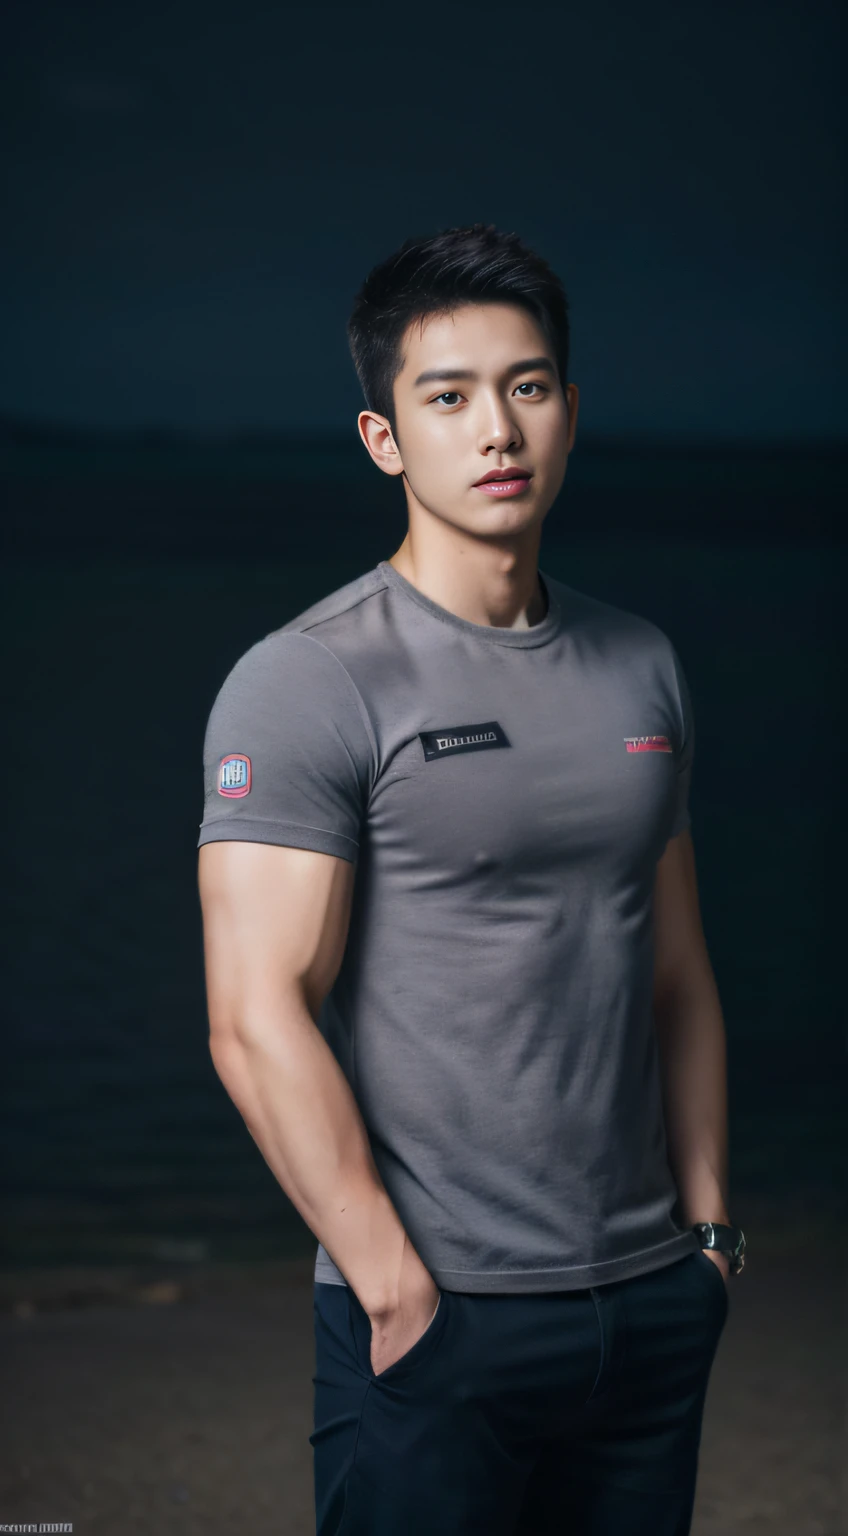 Firefighter in his 20s，with short black hair， Wear a navy shirt, High-res, tmasterpiece, best qualtiy, Head:1.3,((Hasselblad photograp)), Fine fine skin, Clear focus, (Cinematic lighting), during night, Gentle lighting, dynamic angle, [:(Detailed face:1.2):0.2],(((Exercise))), sport, The arm muscles are very large, Hands in the crotch.